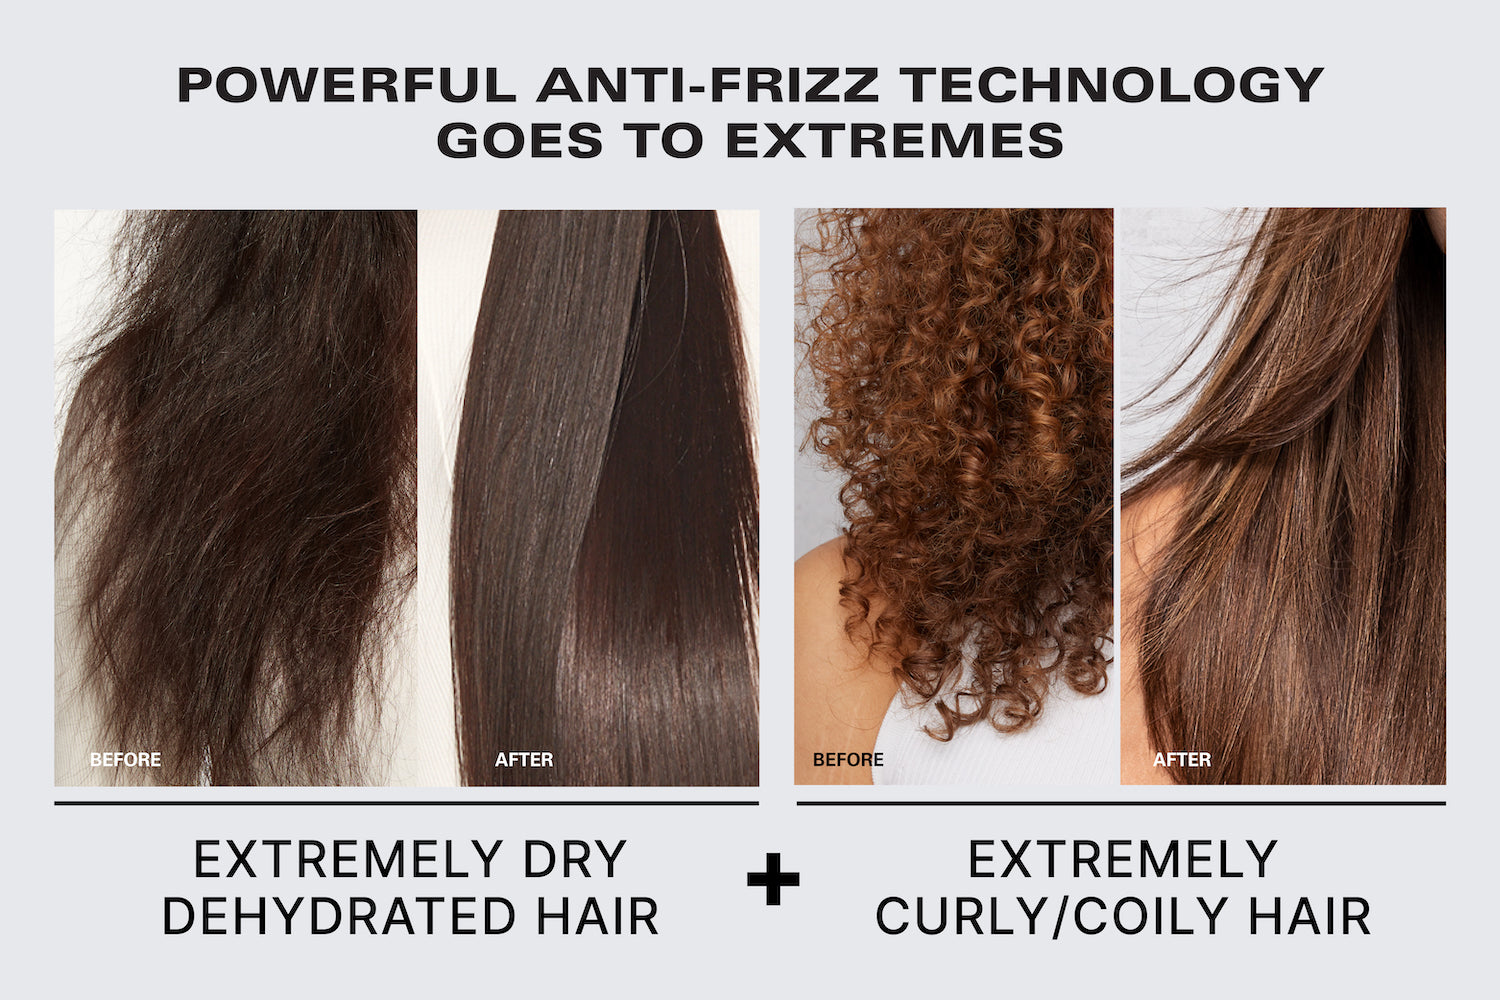 Powerful anti-frizz technology goes to extremes. Before & after of a model with dry, dehydrated, and frizzy hair and then long, straight, smooth hair. Before & after of a model with curly hair and then long, straight, smooth hair. For extremely dry dehydrated hair and curly/coily hair. 